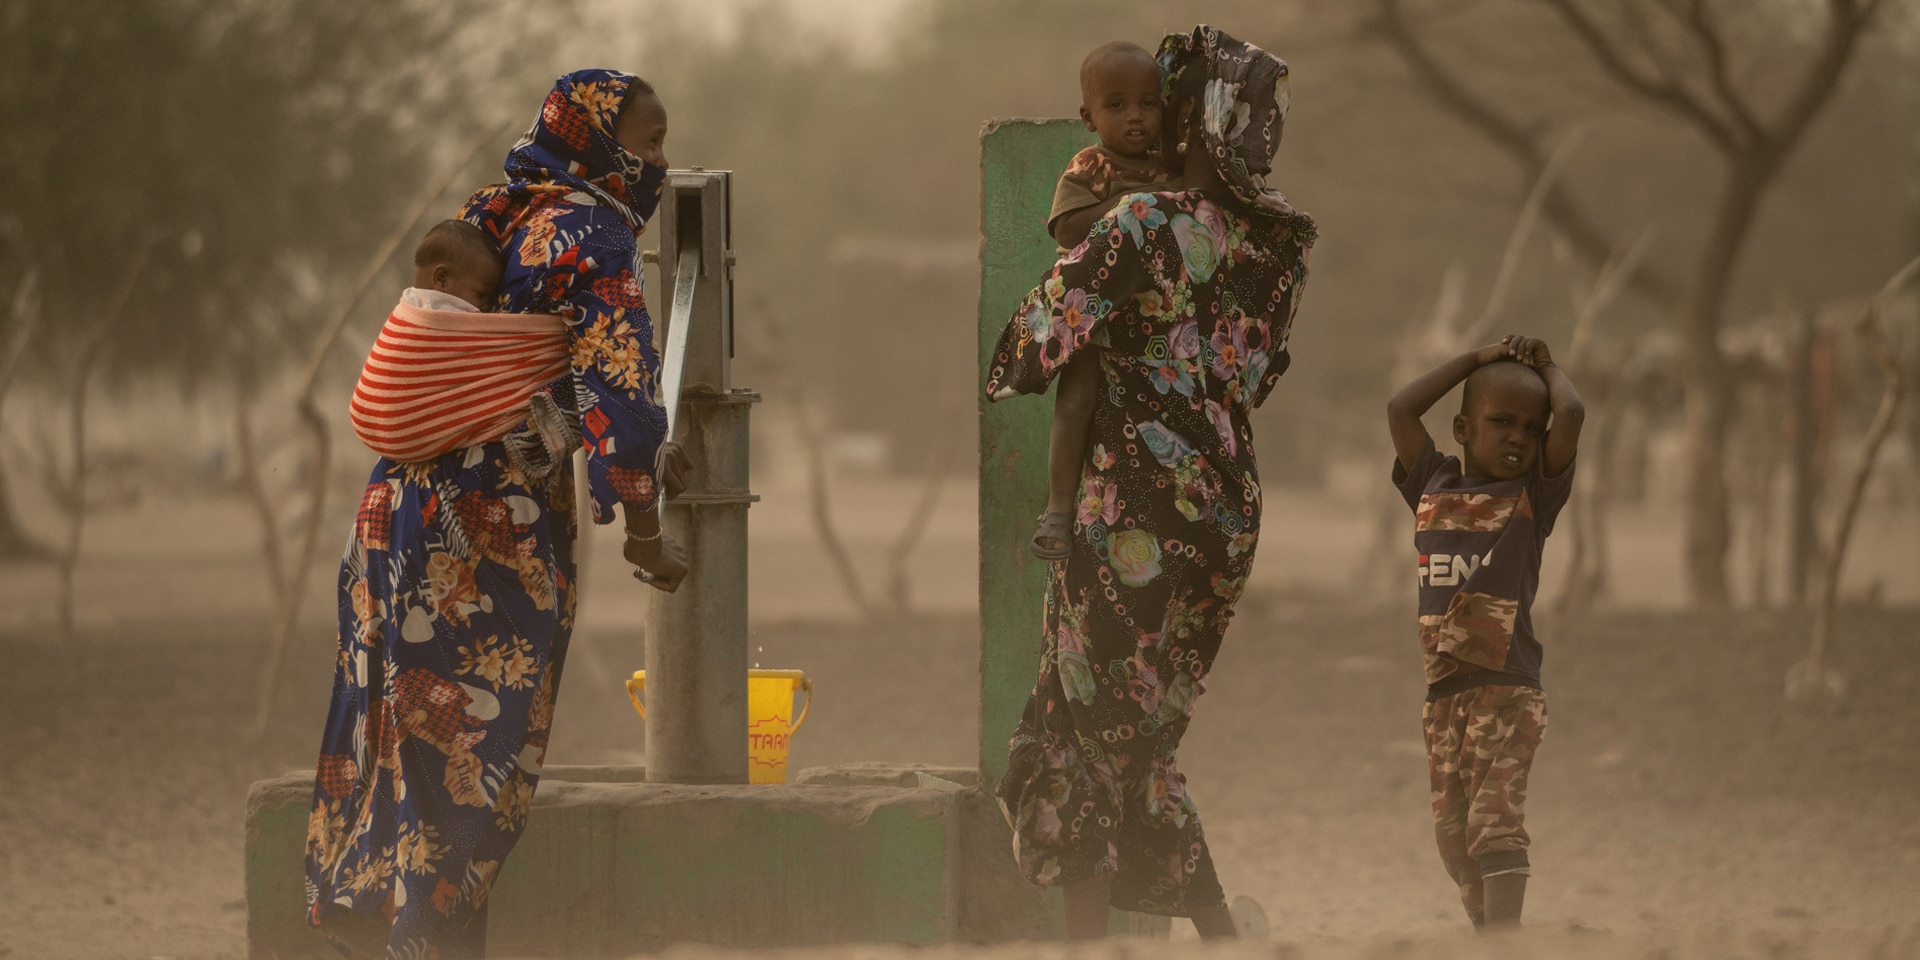 African women pump water from a well in Chad.